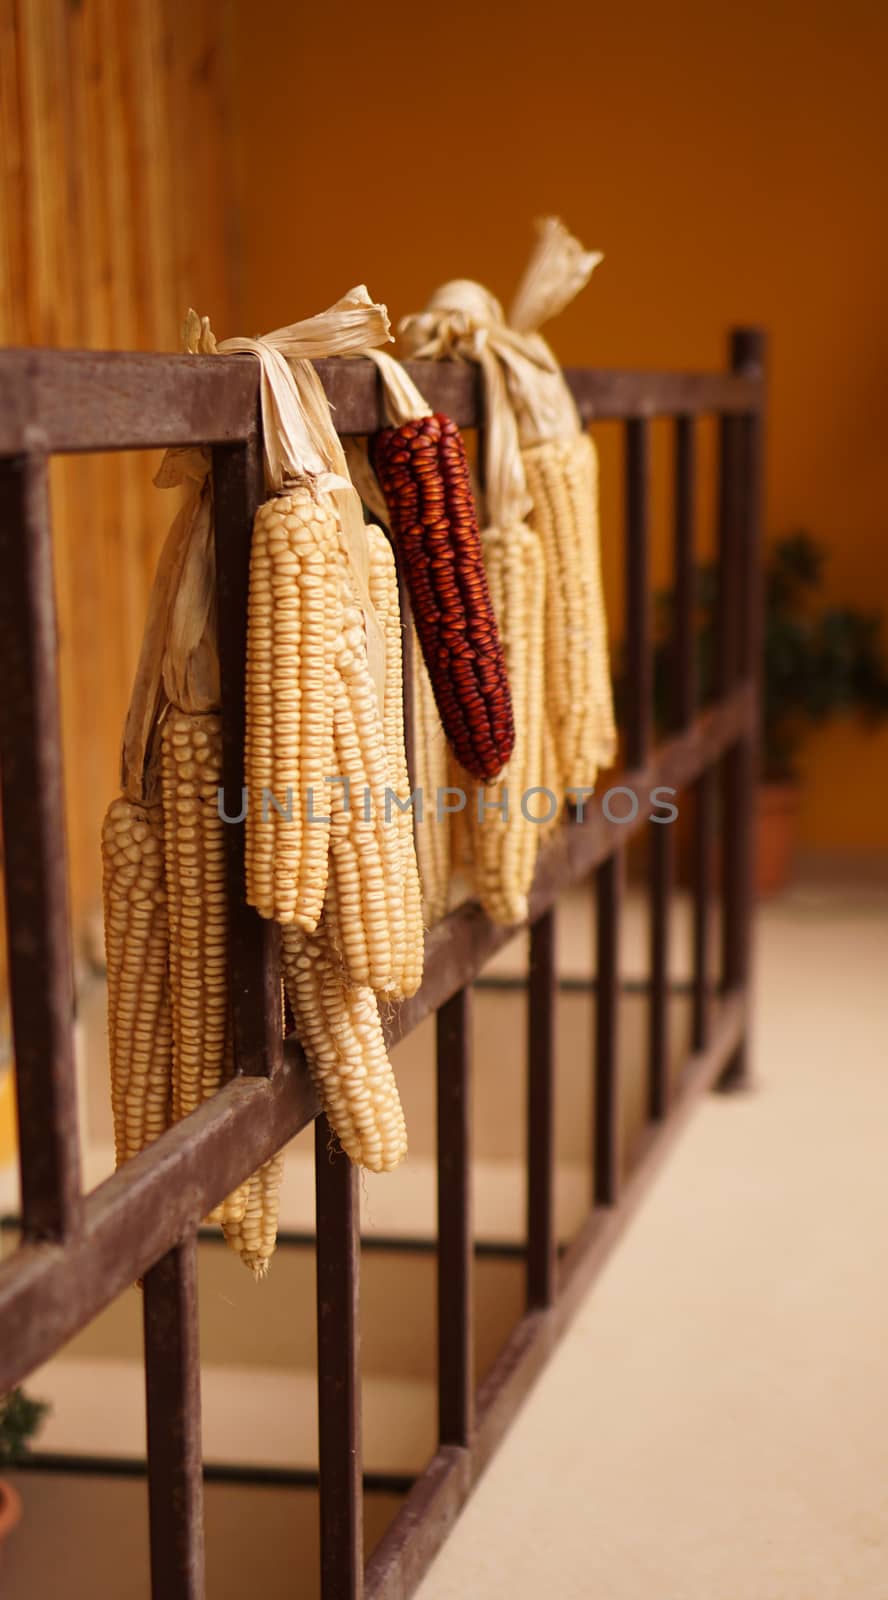 Ripe dried corn cobs hanging on the old wooden balcony - agriculture concept